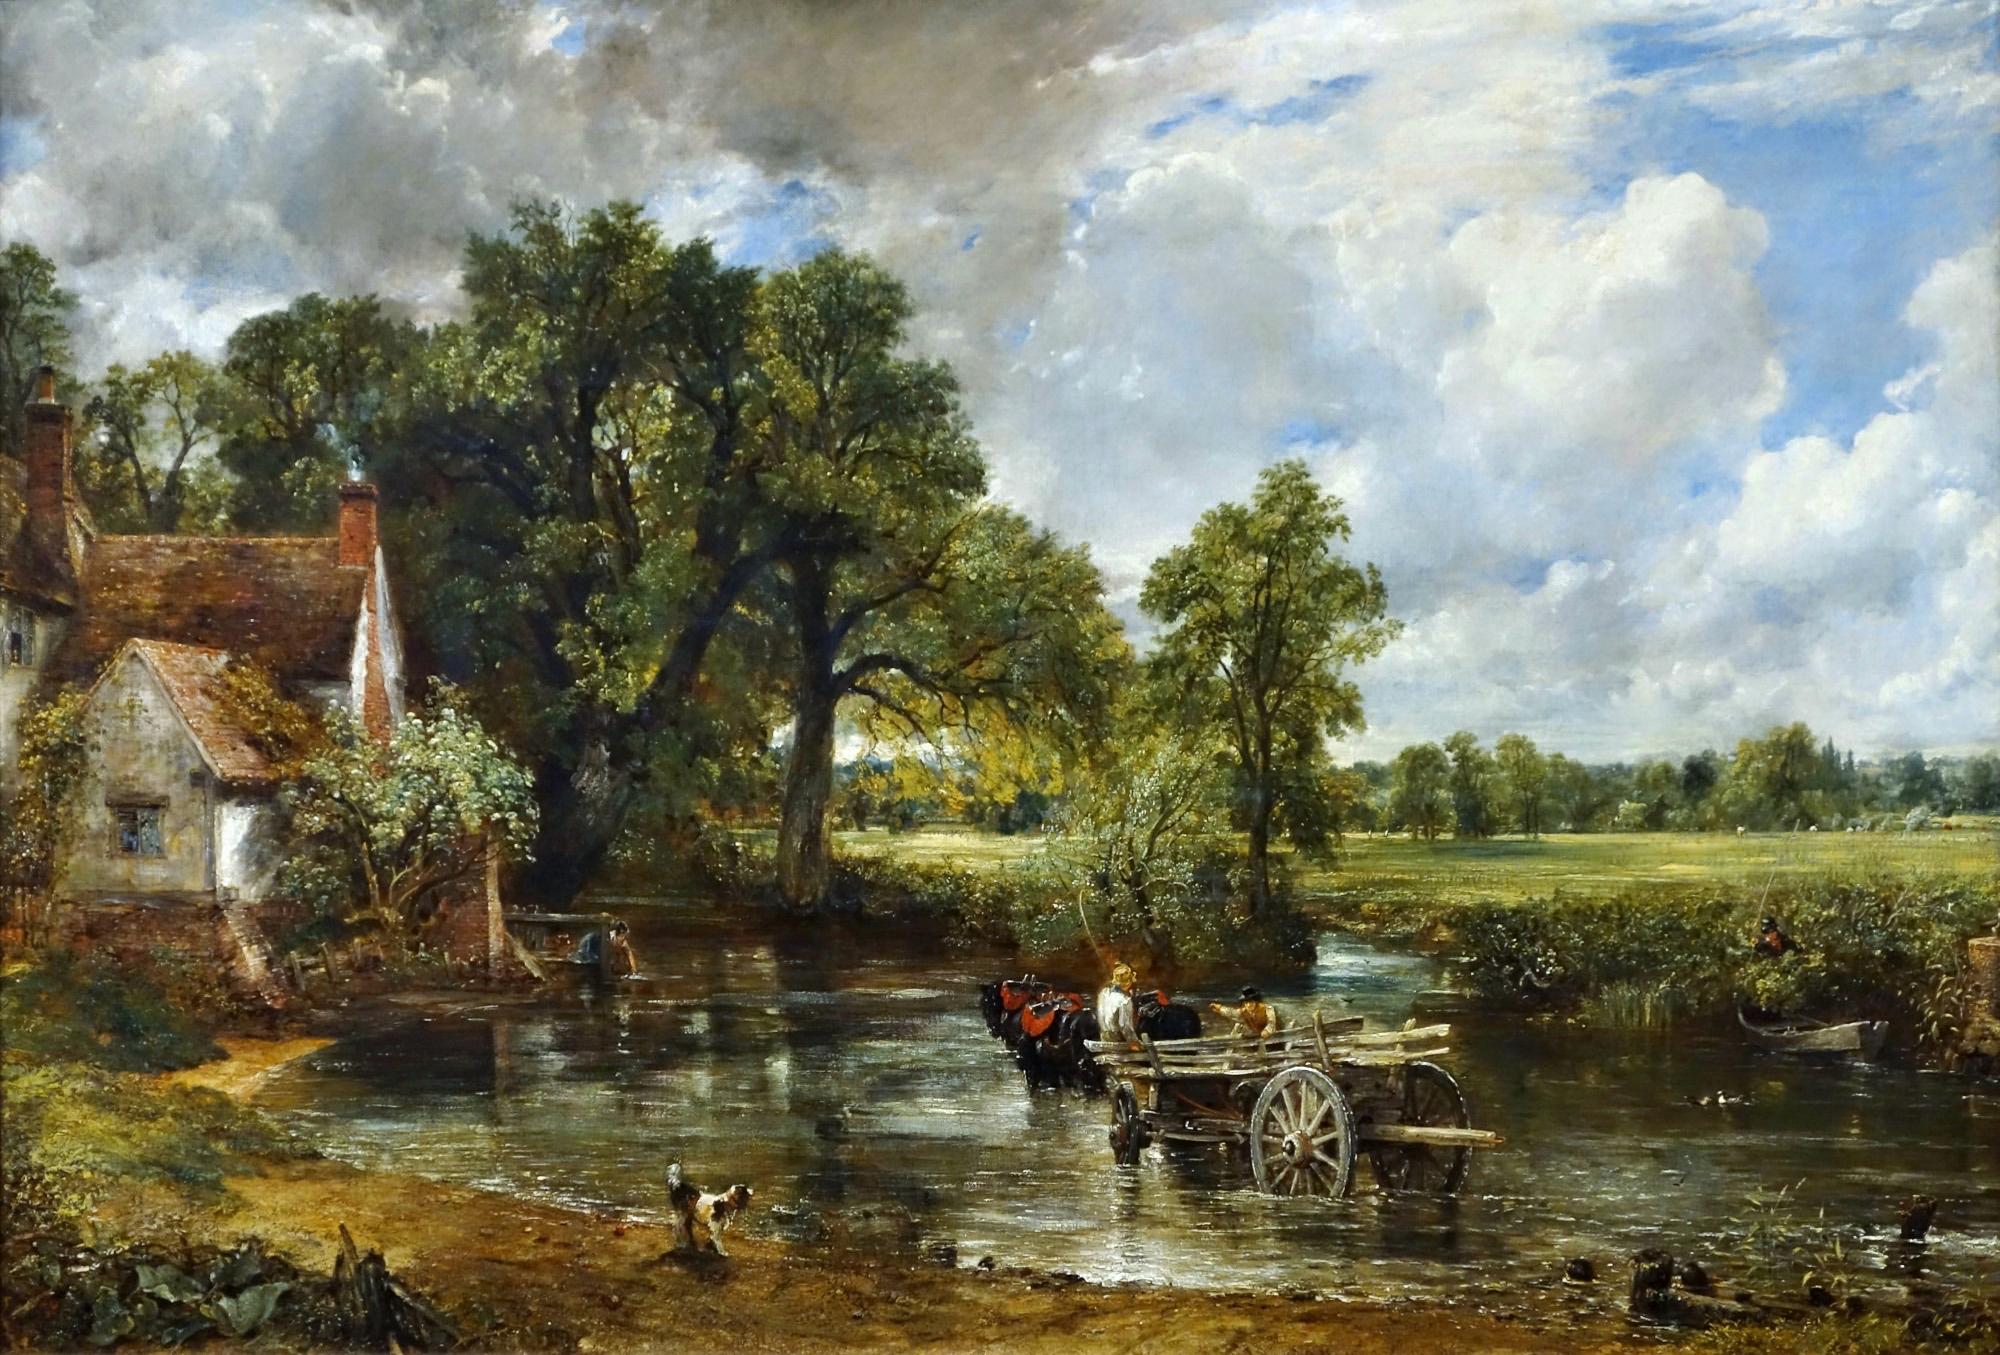 The Hay Wain” painted by John Constable 1821 - photographed at the National Gallery London by the author